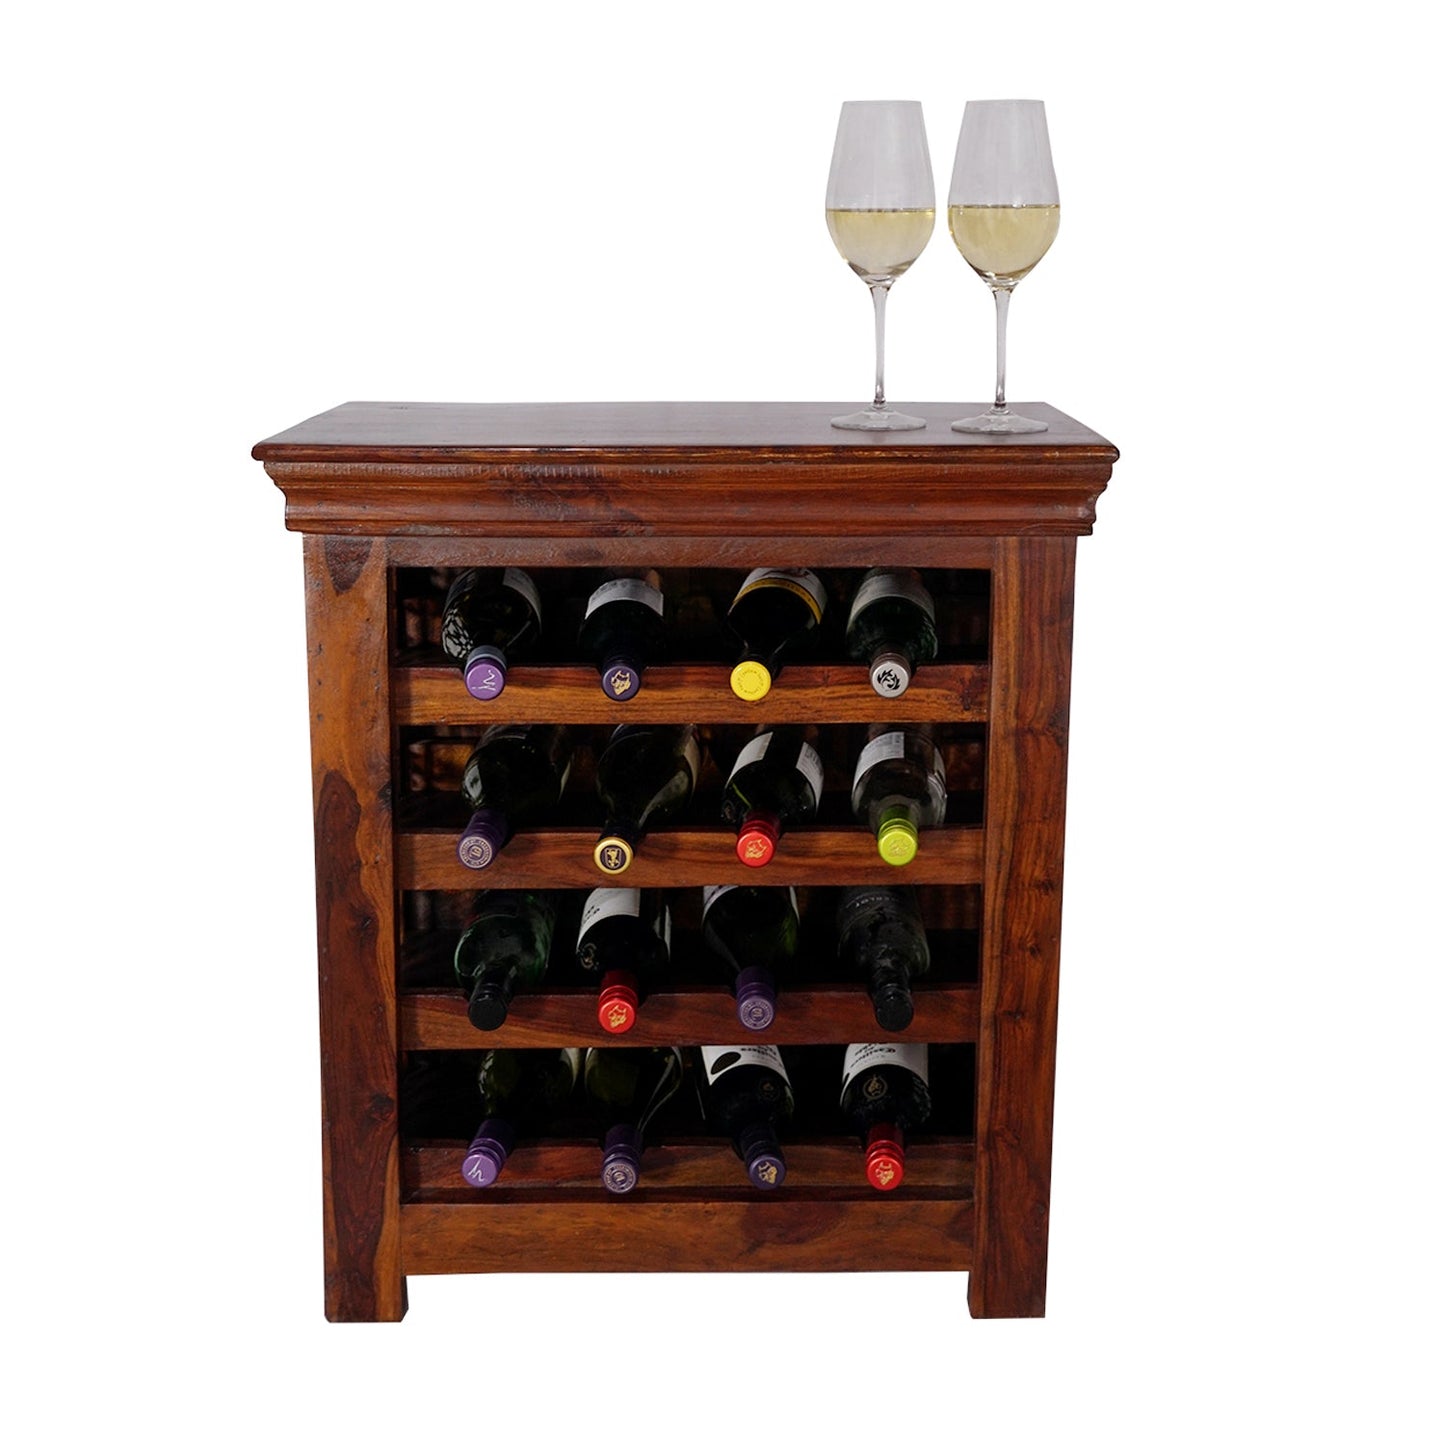 Indian Handcrafted Wooden Wine Rack with Jali Design for upto 16 bottles - Stylla London